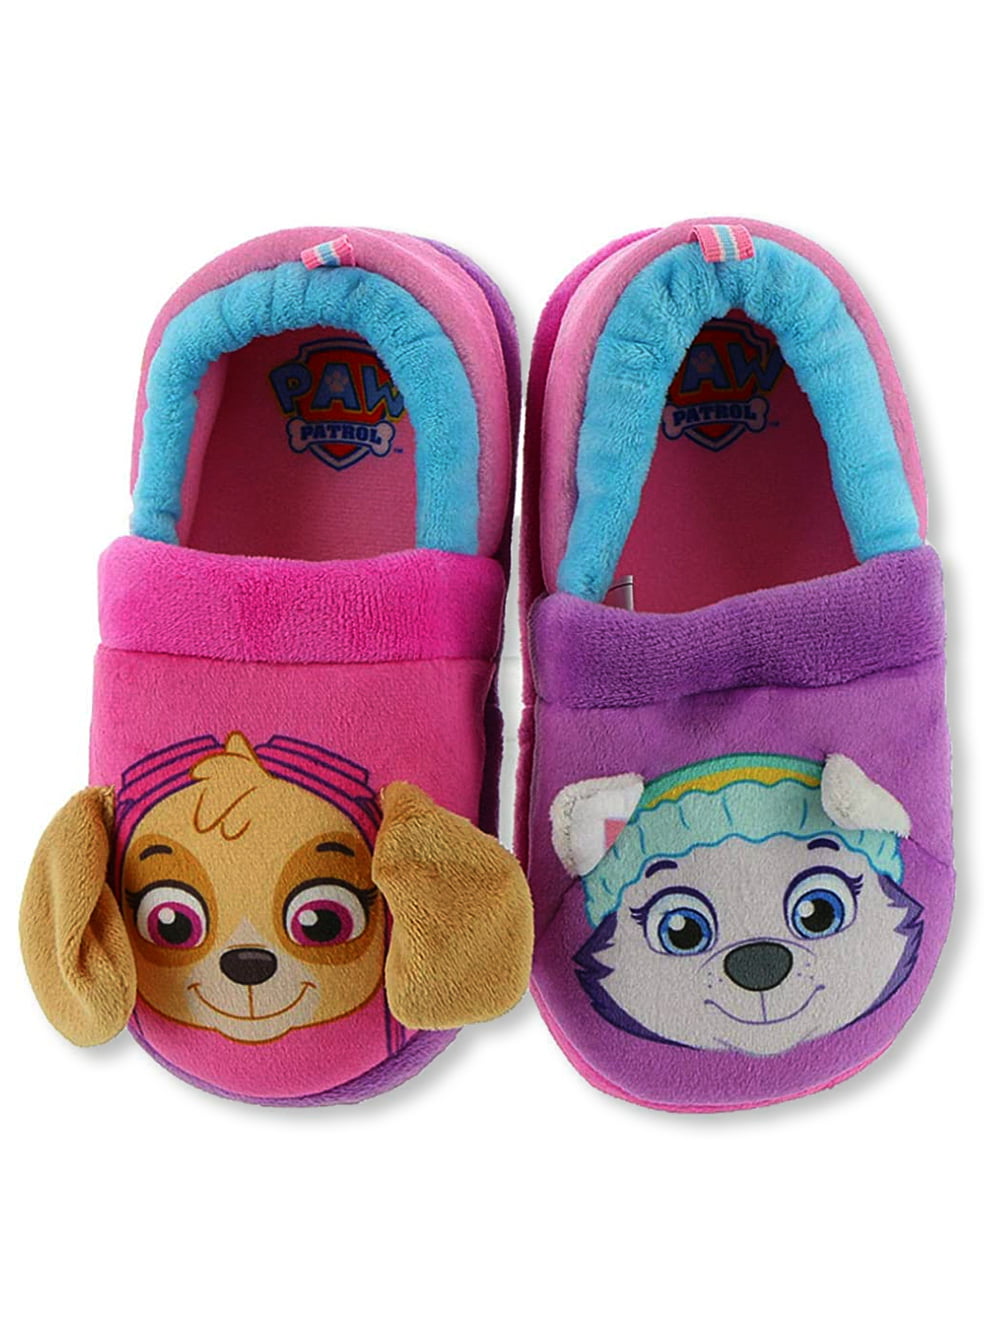 Girls Kids Size UK 12 Pink Moccasin Slippers 